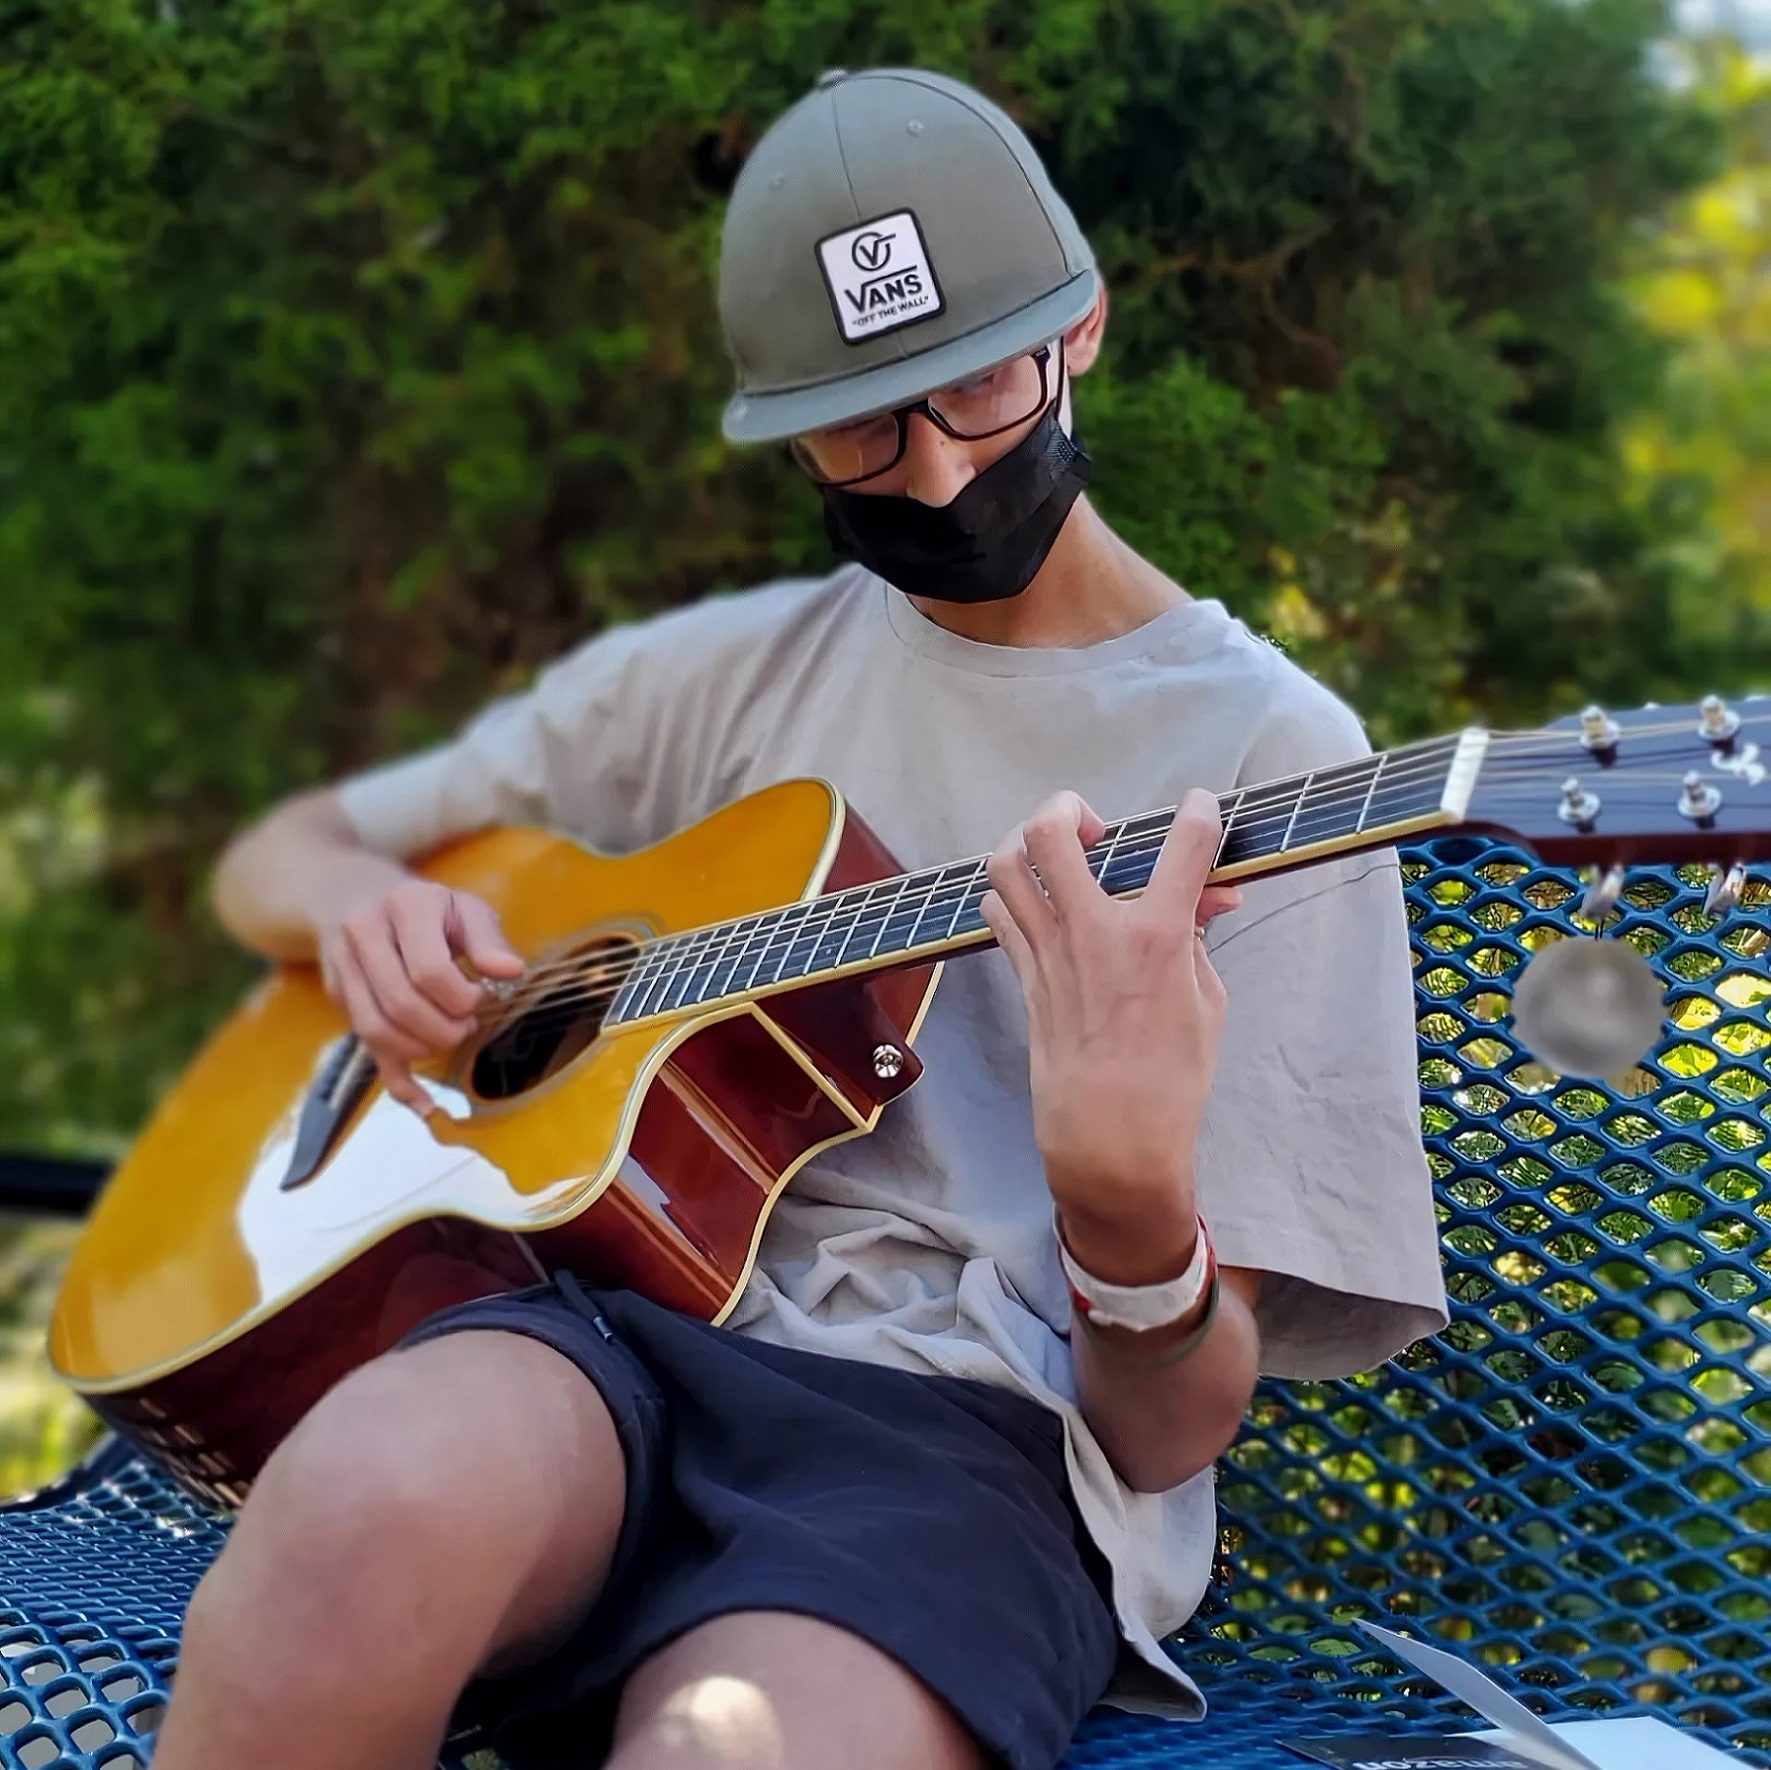 kid sitting on a bench with a cap and a face mask on, playing the guitar. He has a medical bracelet on his wrist.